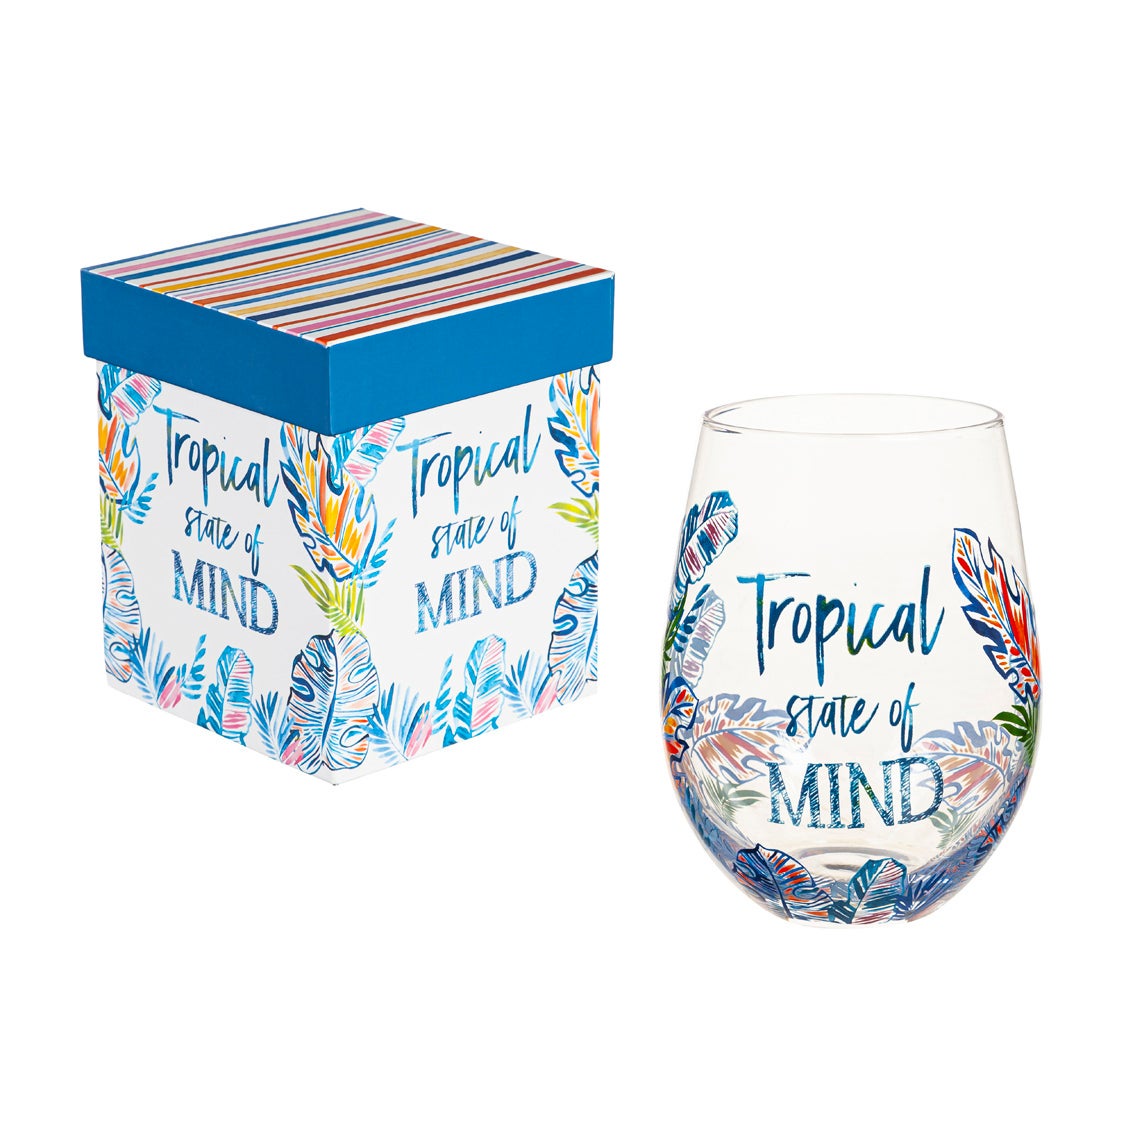 Tropical State of Mind Stemless Glass, 17 oz.